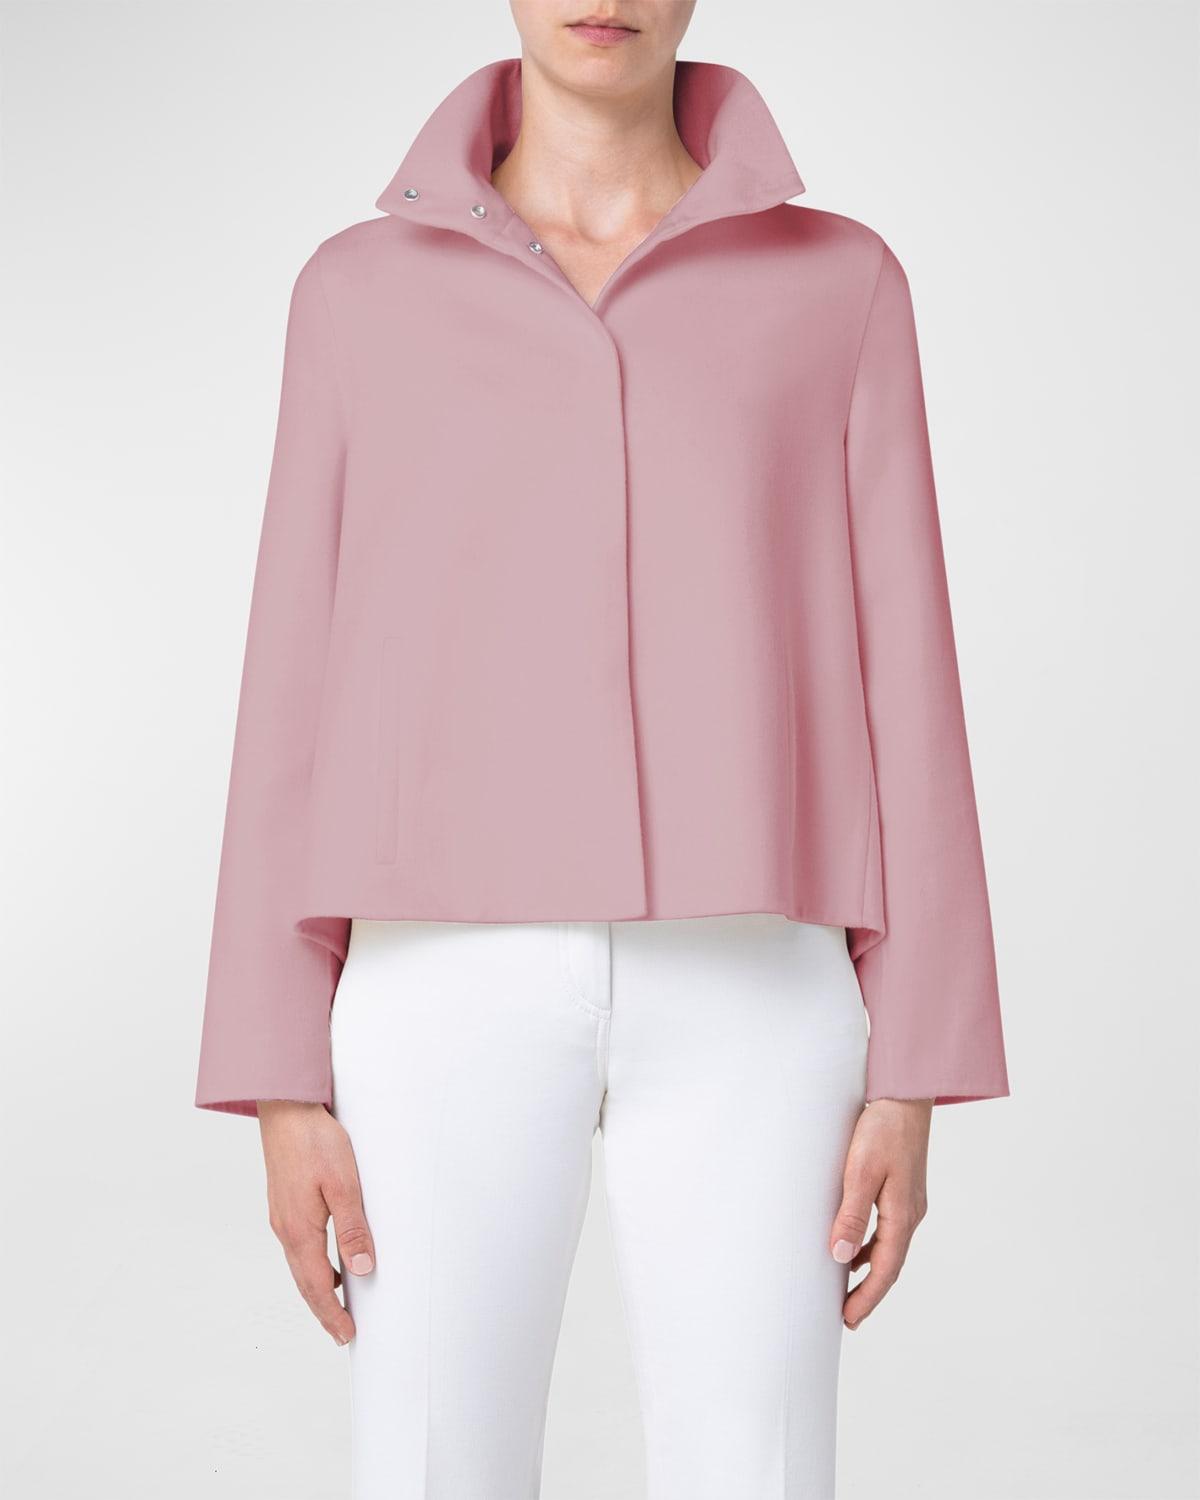 Akris Castro Cashmere Swing Coat in Pink | Lyst